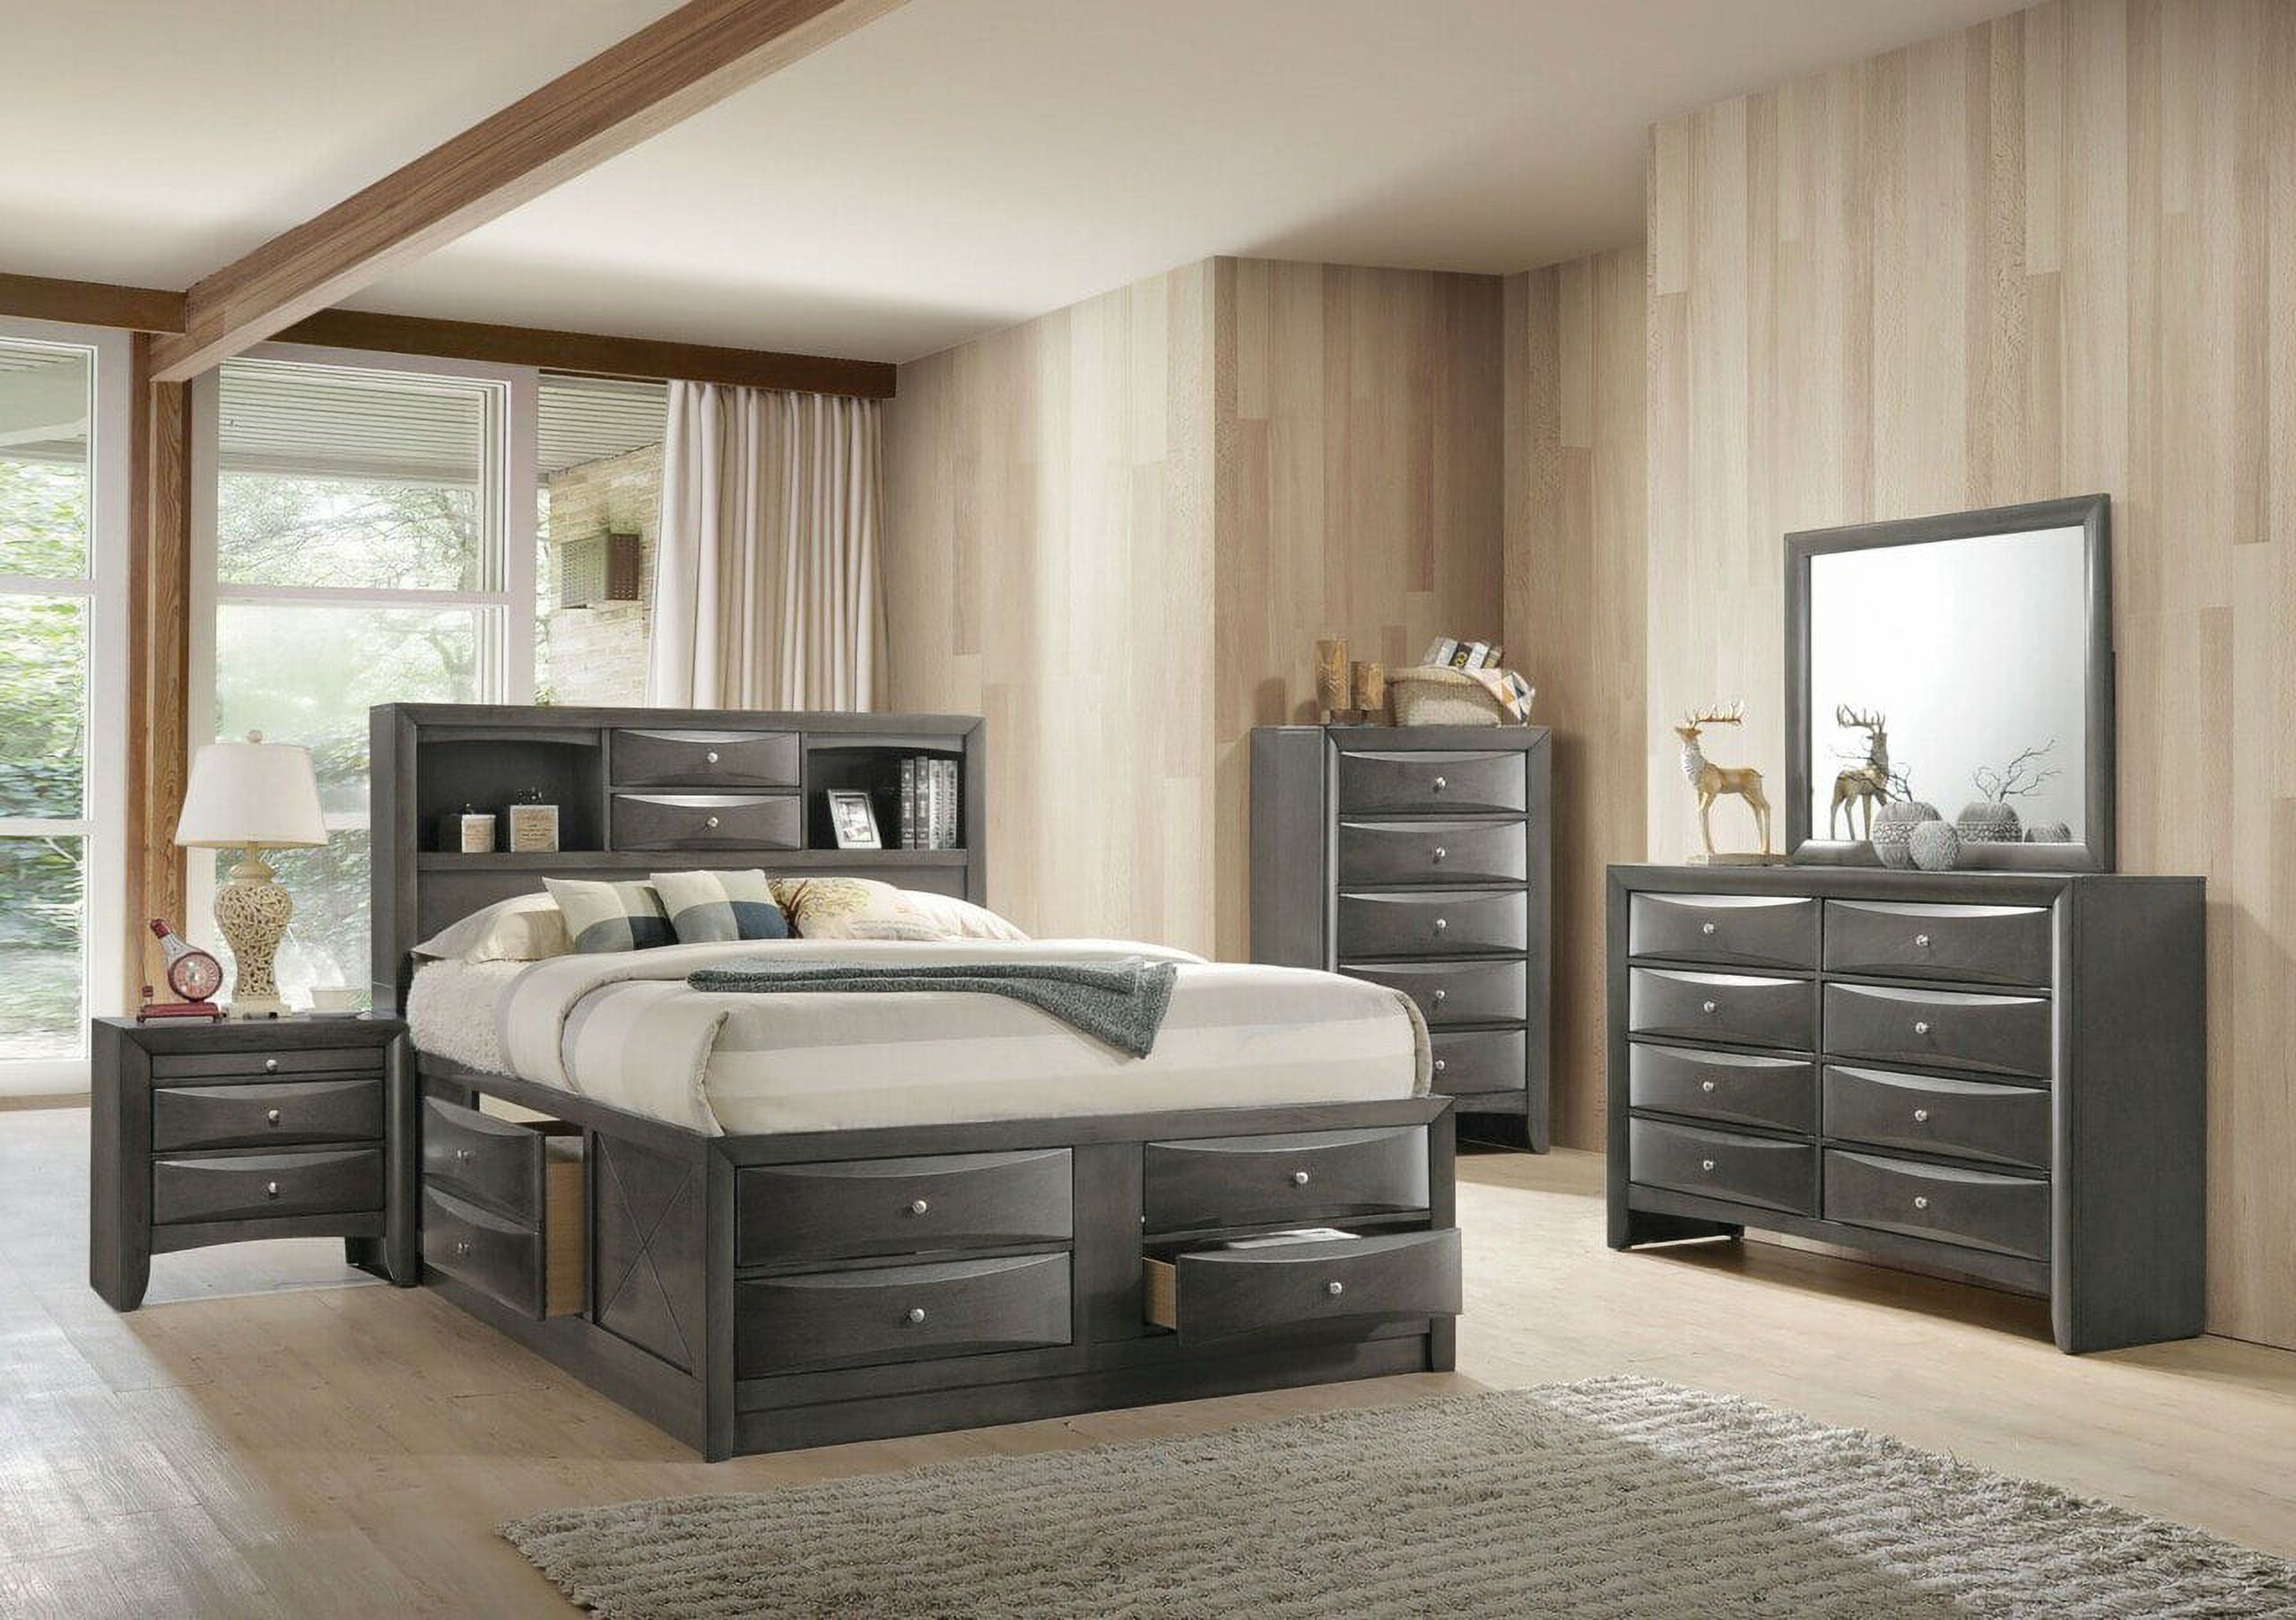 86" X 57" X 56" Gray Oak Rubber Wood Full Storage Bed - image 4 of 6